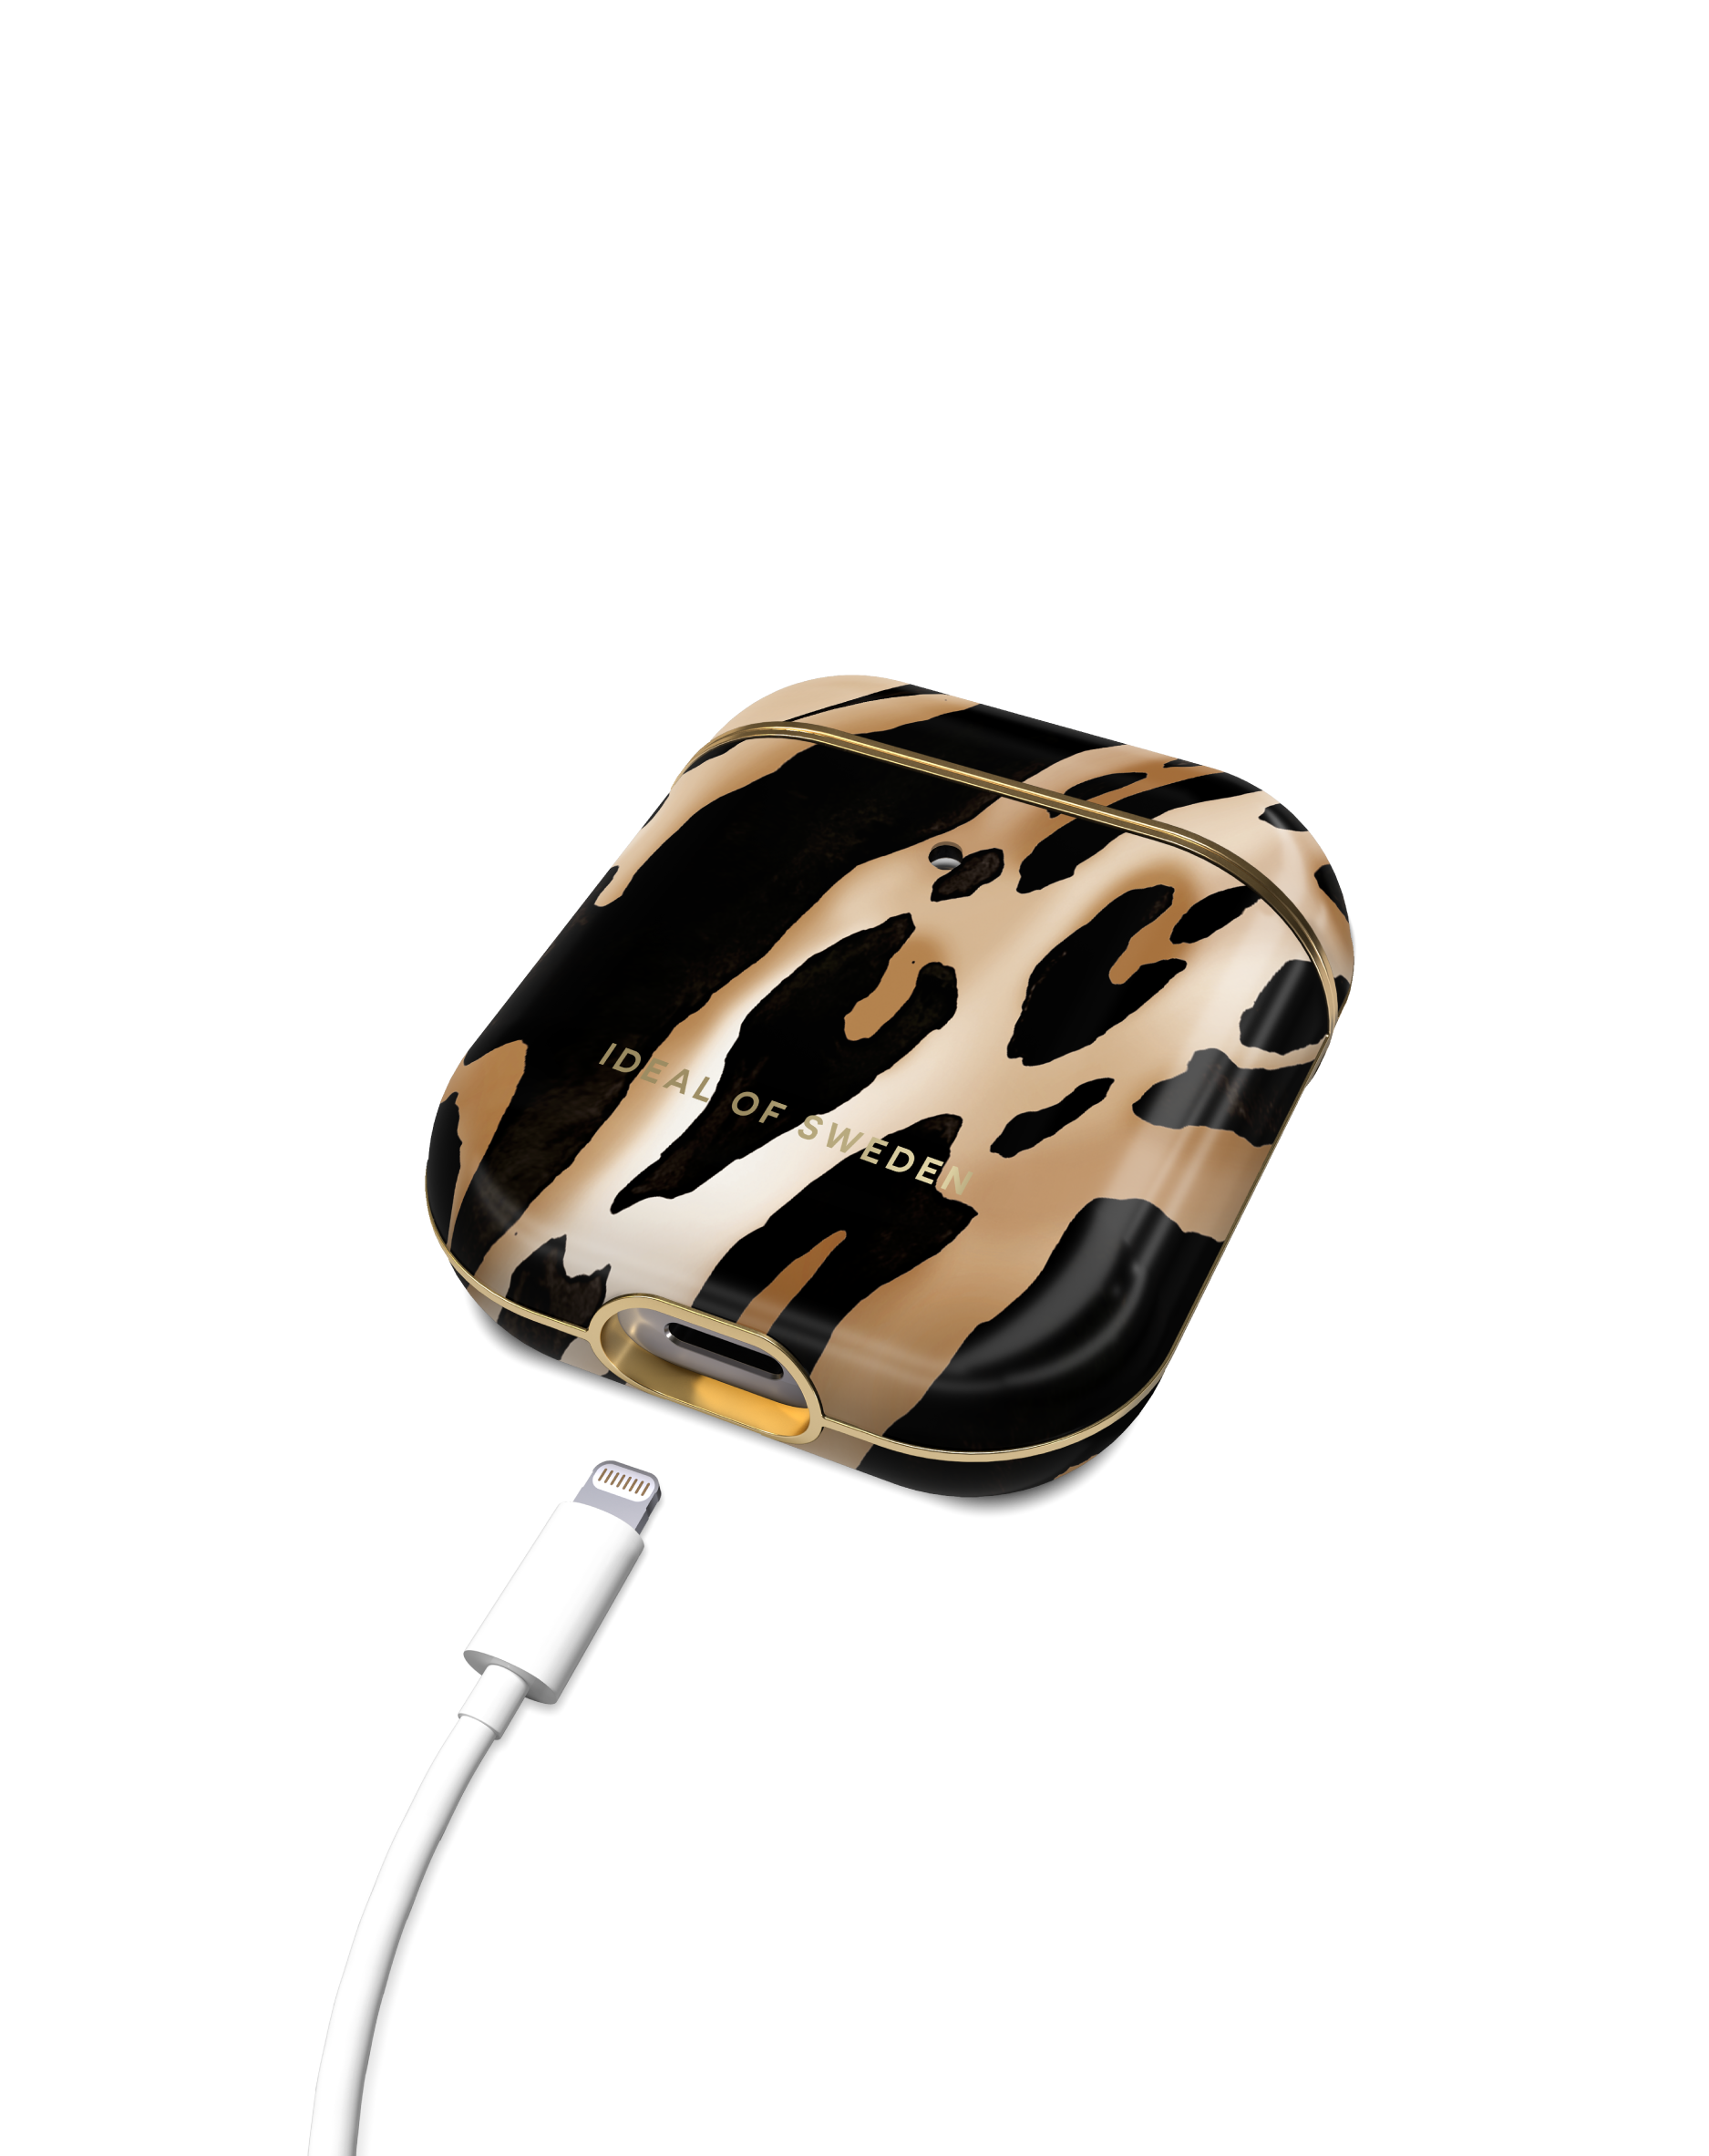 IDEAL OF SWEDEN IDFAPCAW21-356 AirPod Apple Cover Iconic für: Case Full passend Leopard